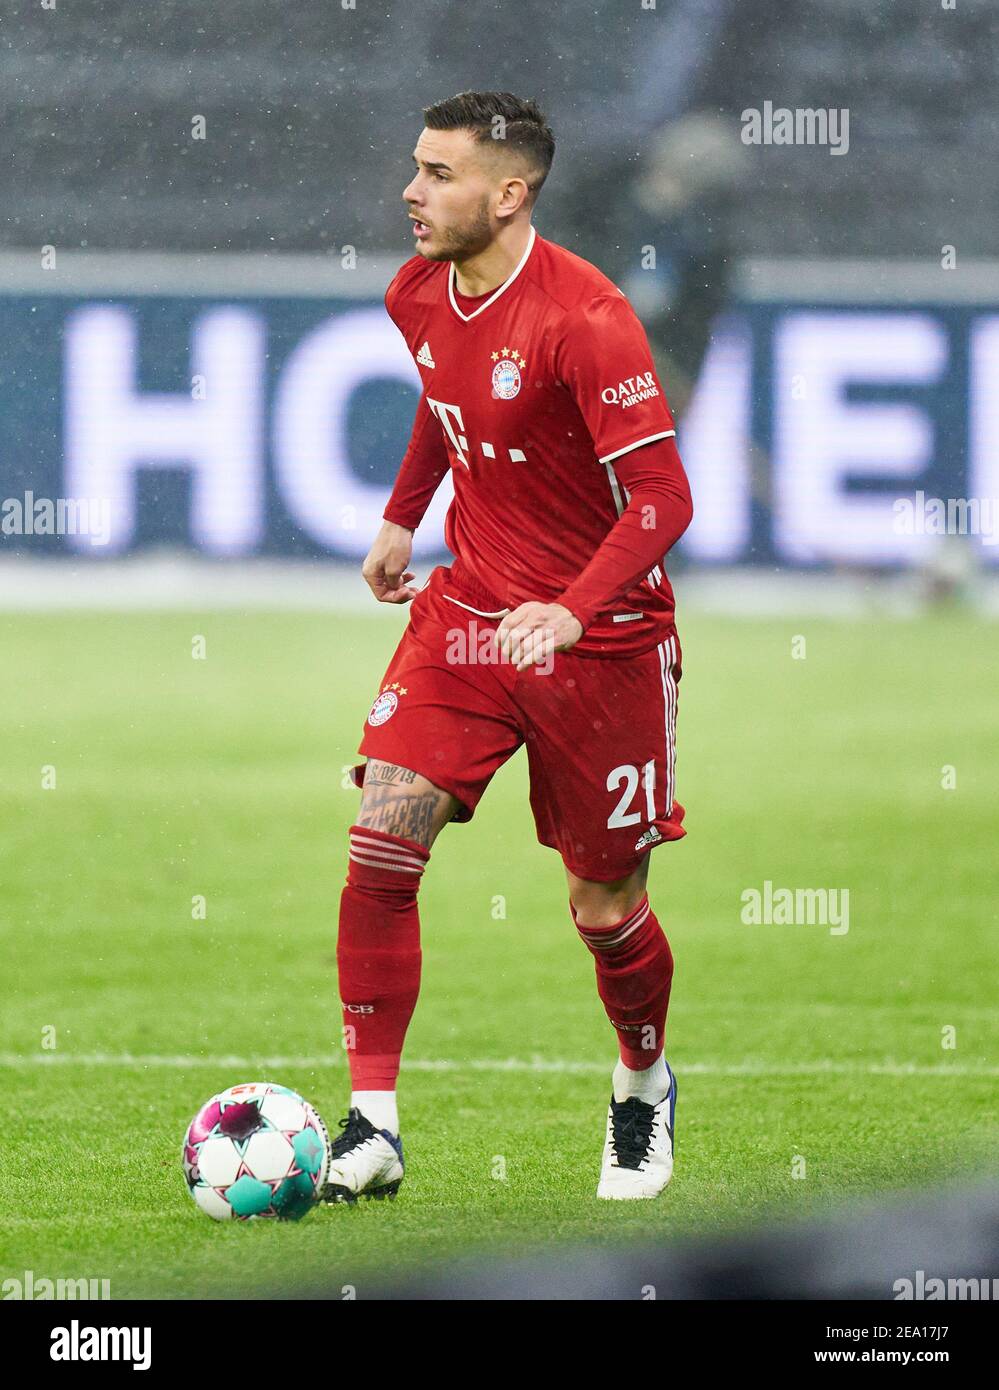 Berlin, Germany. 05th Feb, 2021. Lucas HERNANDEZ (FCB 21)  in the match HERTHA BSC BERLIN - FC BAYERN MUENCHEN 0-1 1.German Football League on February 5, 2021 in Berlin, Germany  Season 2020/2021, matchday 20, 1.Bundesliga, FCB, München, 20.Spieltag © Peter Schatz / Alamy Live News    - DFL REGULATIONS PROHIBIT ANY USE OF PHOTOGRAPHS as IMAGE SEQUENCES and/or QUASI-VIDEO - Credit: Peter Schatz/Alamy Live News Stock Photo